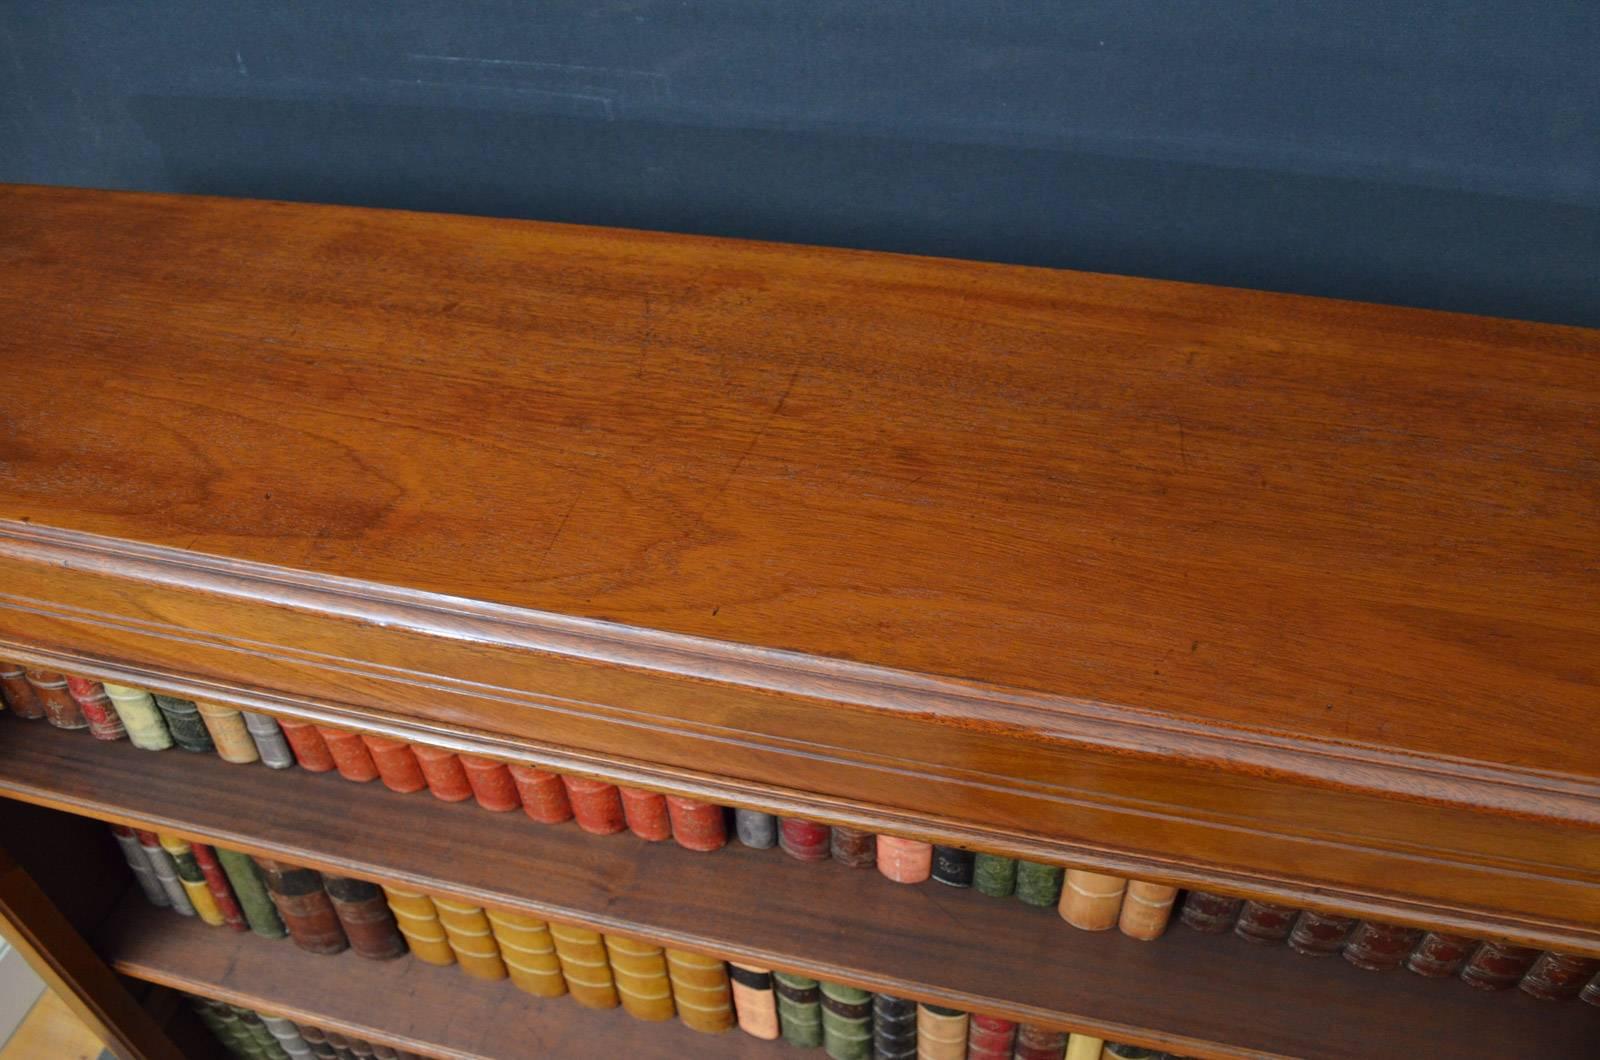 Sn4189 A 19th century, French mahogany bookcase with panelled sides, having figured top with moulded edge and 3 height adjustable shelves above base drawer, all flanked by rounded corners, standing in turned legs. This antique bookcase is in home